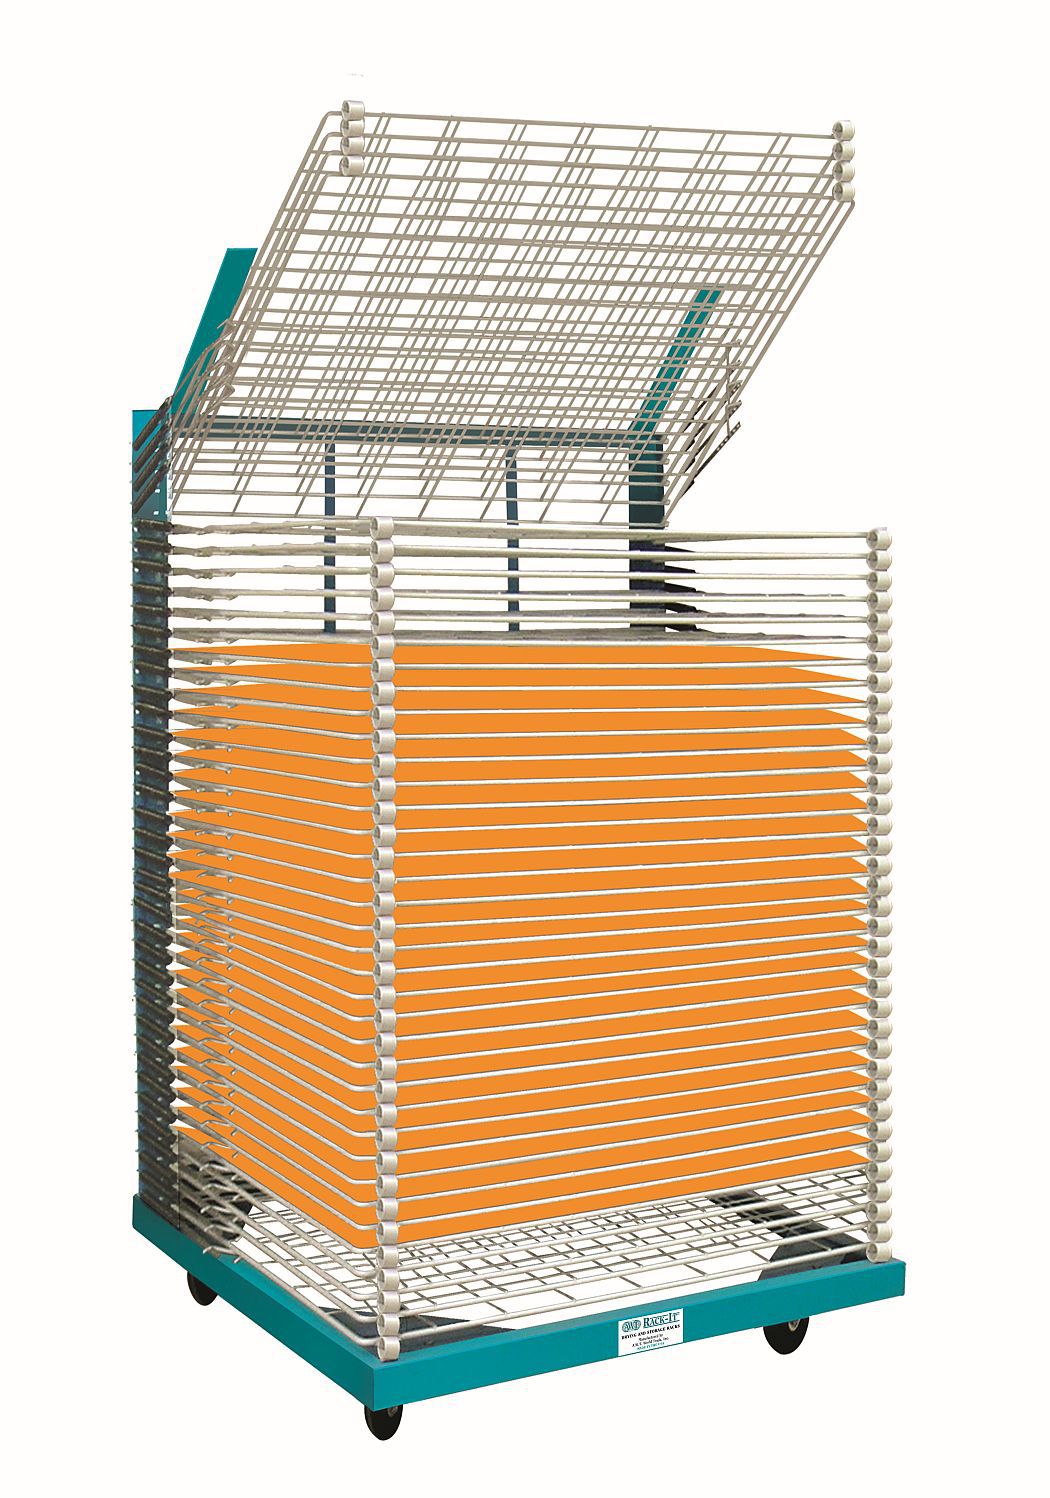 <p><b>A.W.T.'s Rack-It</b> Heavy-Duty Drying Racks represent the practical application of decades of industry expertise. Built on a welded steel frame, these racks provide safe and secure storage for drying or transporting substrates in industrial and production environments. </p> <p>We use steel bumpers because they outlast rubber, and we weld them to the outside of the shelf so you have more total drying room. Each shelf spring is individually adjustable so you can easily control up/down operation.</p> <p>To facilitate quick evaporation, these heavy-duty racks come with non-warping shelves spaced and 1" or 2" intervals. The power-coated shelf finish is rust- and solvent-resistant for years or service. </p> <p>Drying and storage racks are an indispensable organizational tool for drying, story and moving screens, prints, and other flat substrates.</p>